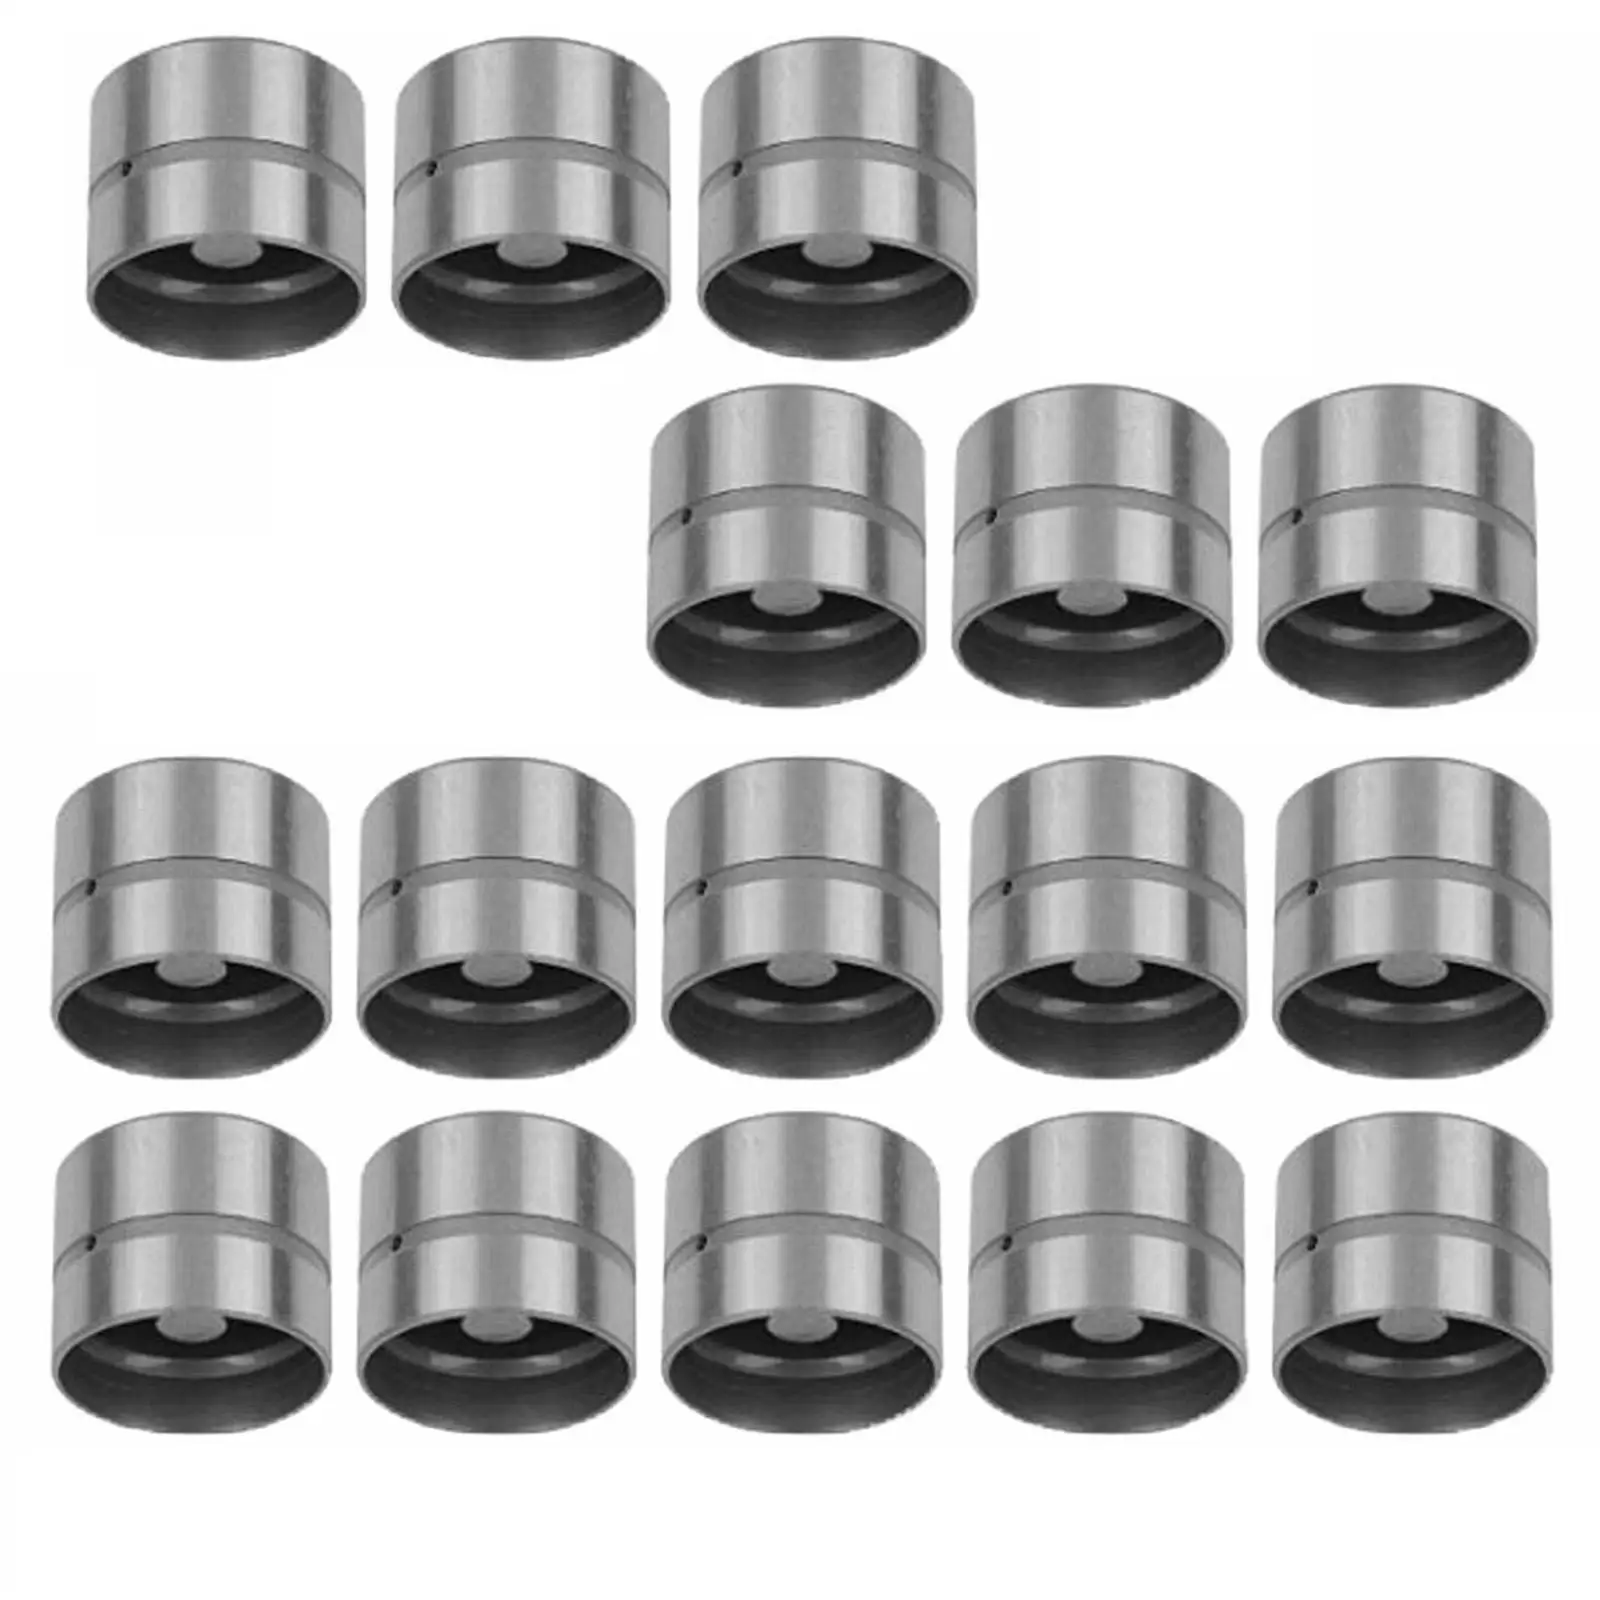 16Pcs Hydraulic Lifters Tappets Spare Parts Replacement Valves Parts Repair Accessories for 20XE C20XE 420011810 90570967